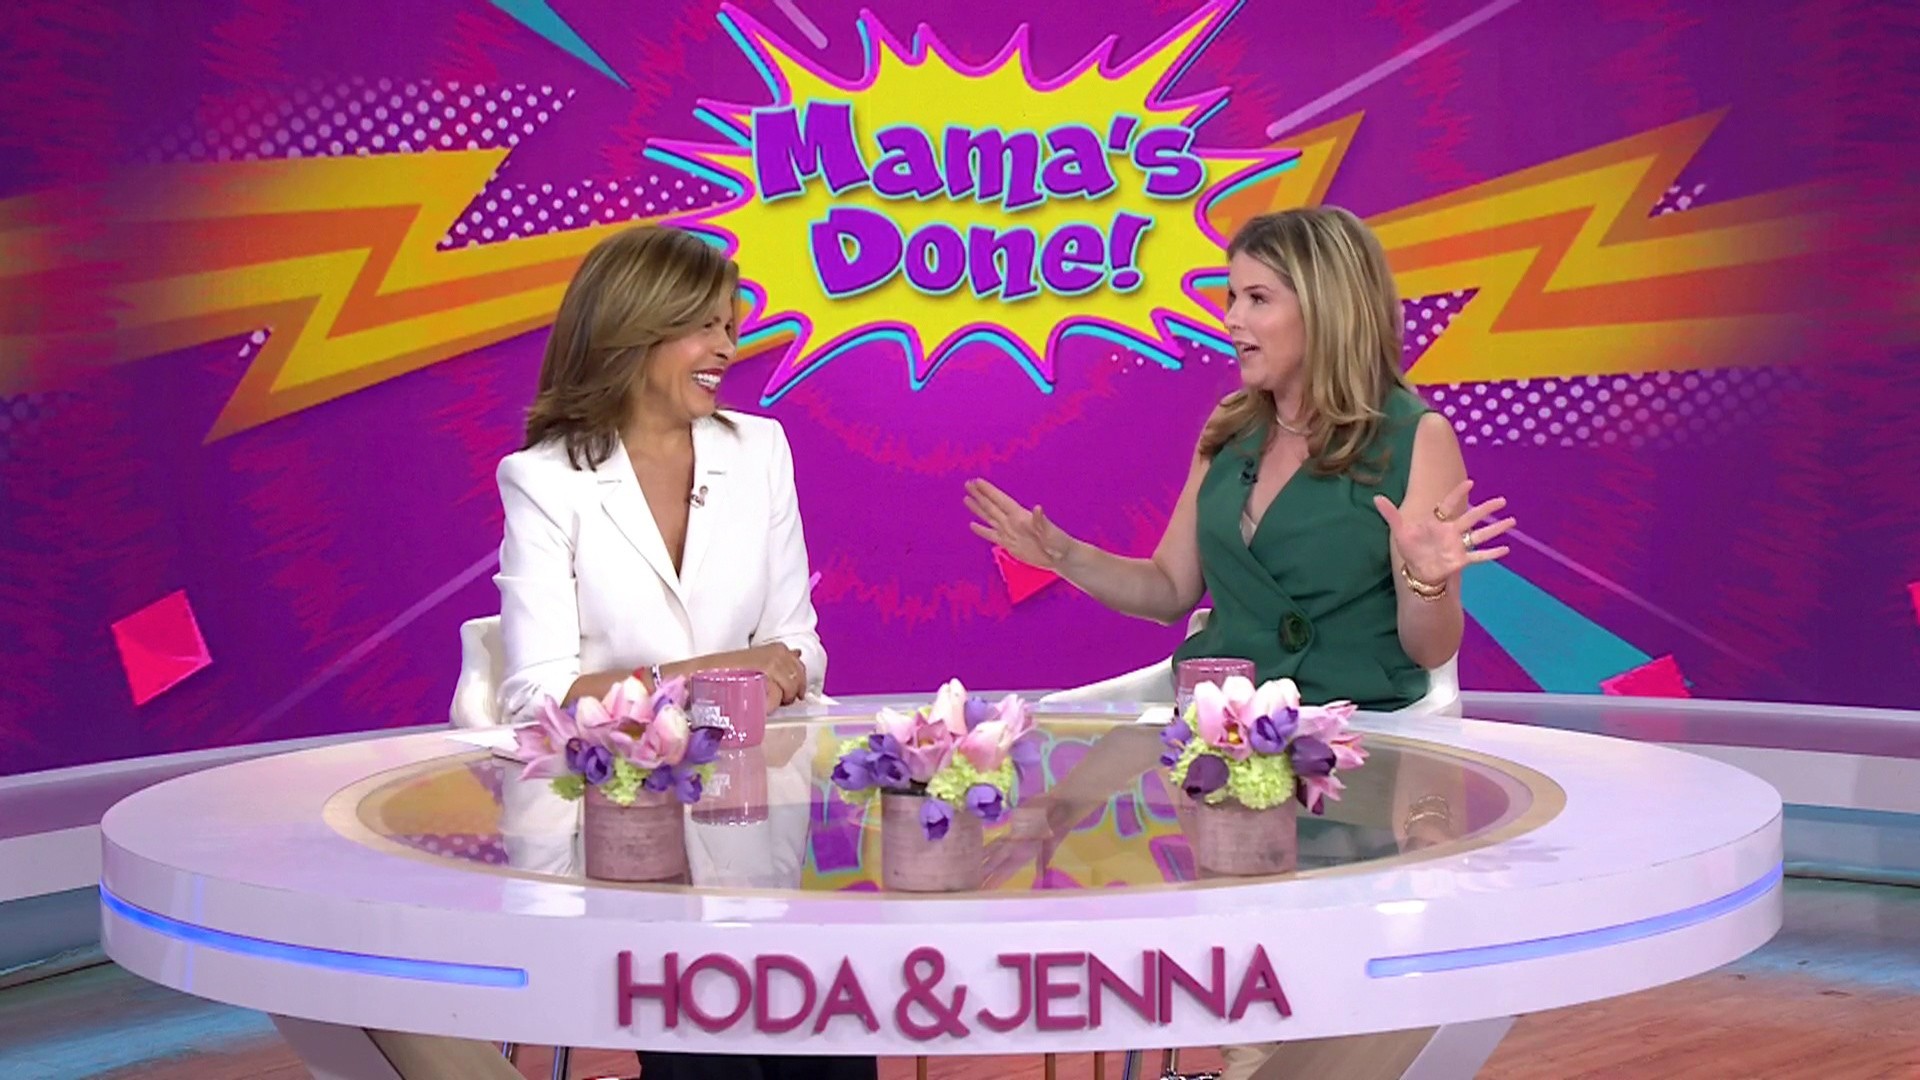 Hoda & Jenna rant on party favors, making multiple dinners, more